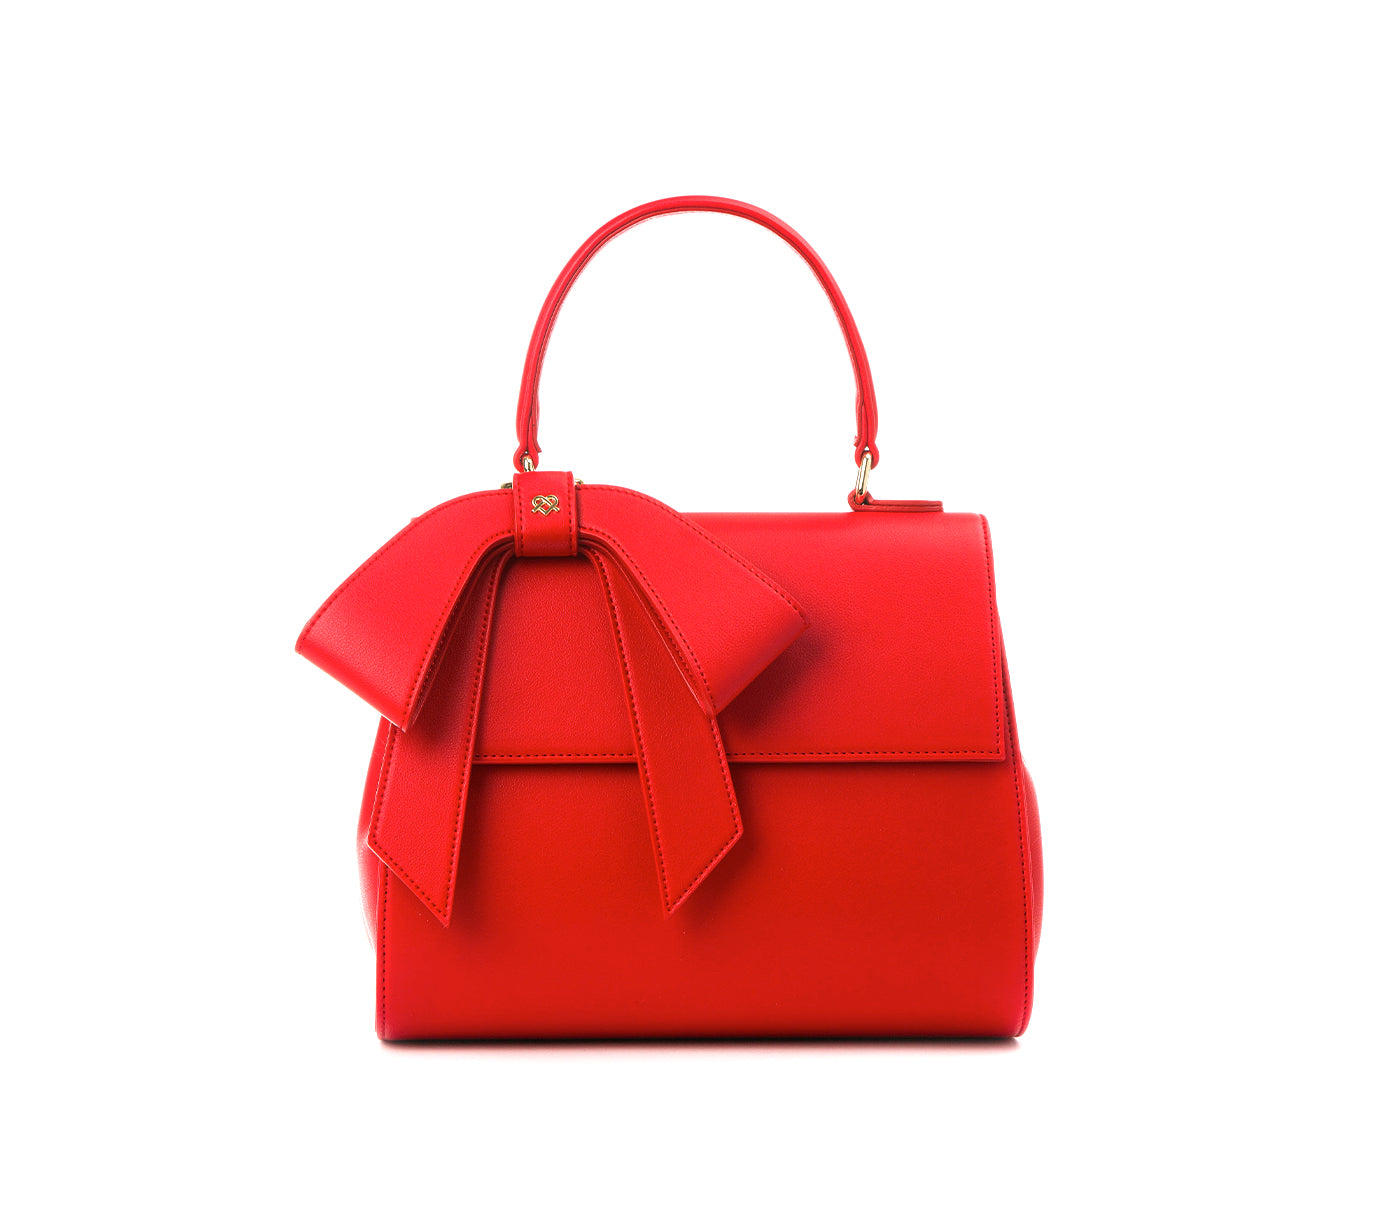 Cottontail Mini Keychain - Red, Ethically Made Bag Accessories